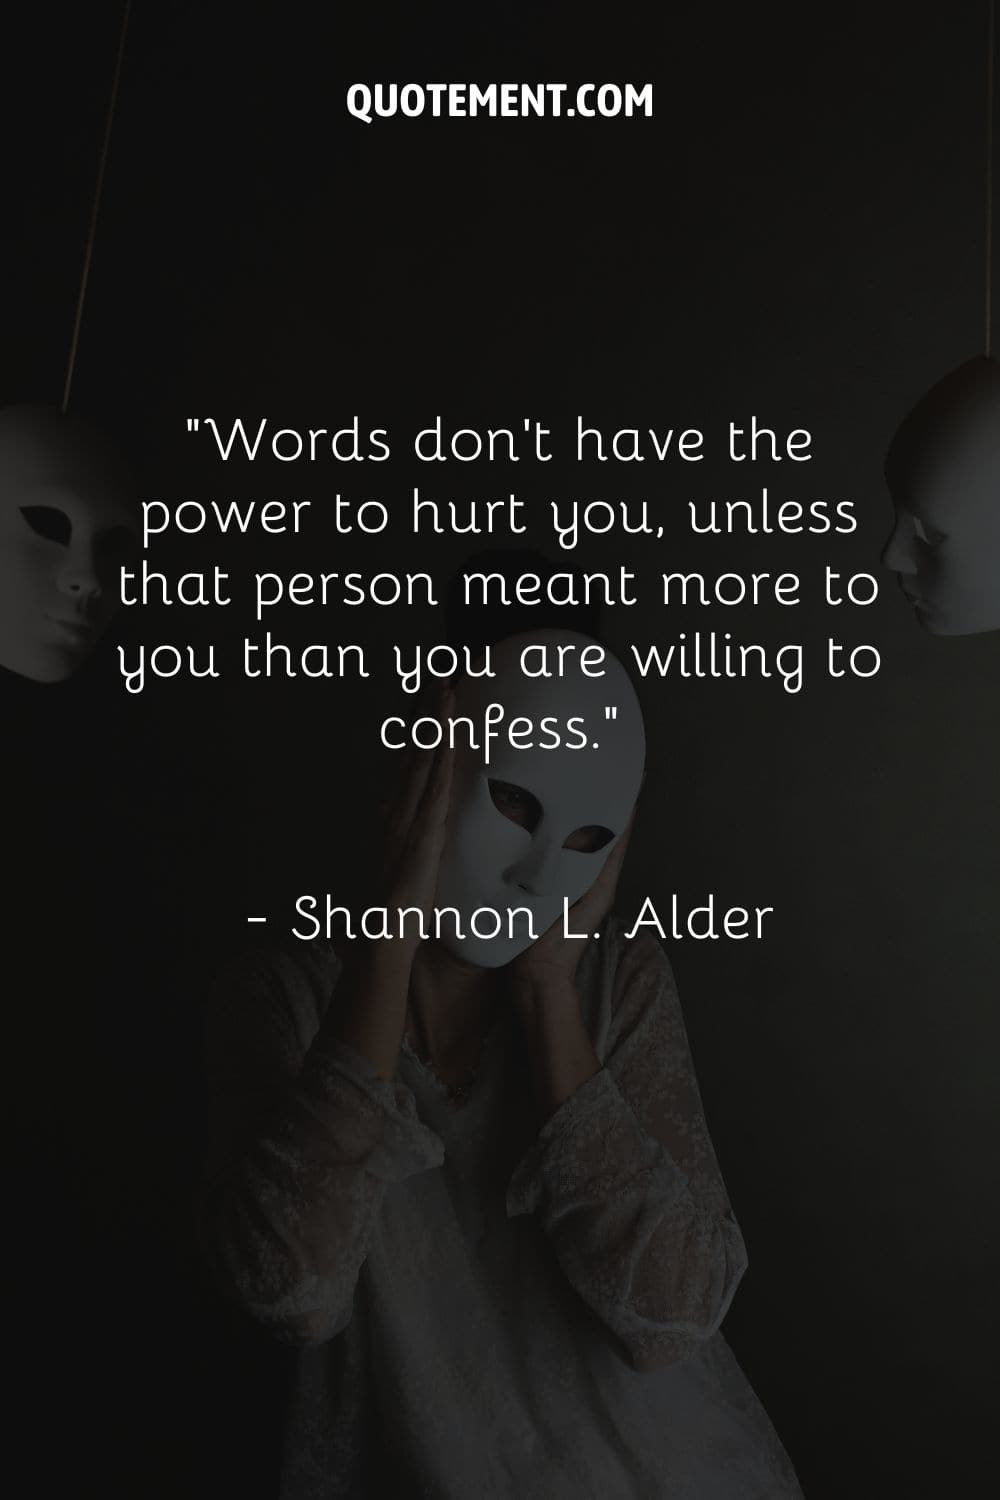 Words don’t have the power to hurt you, unless that person meant more to you than you are willing to confess